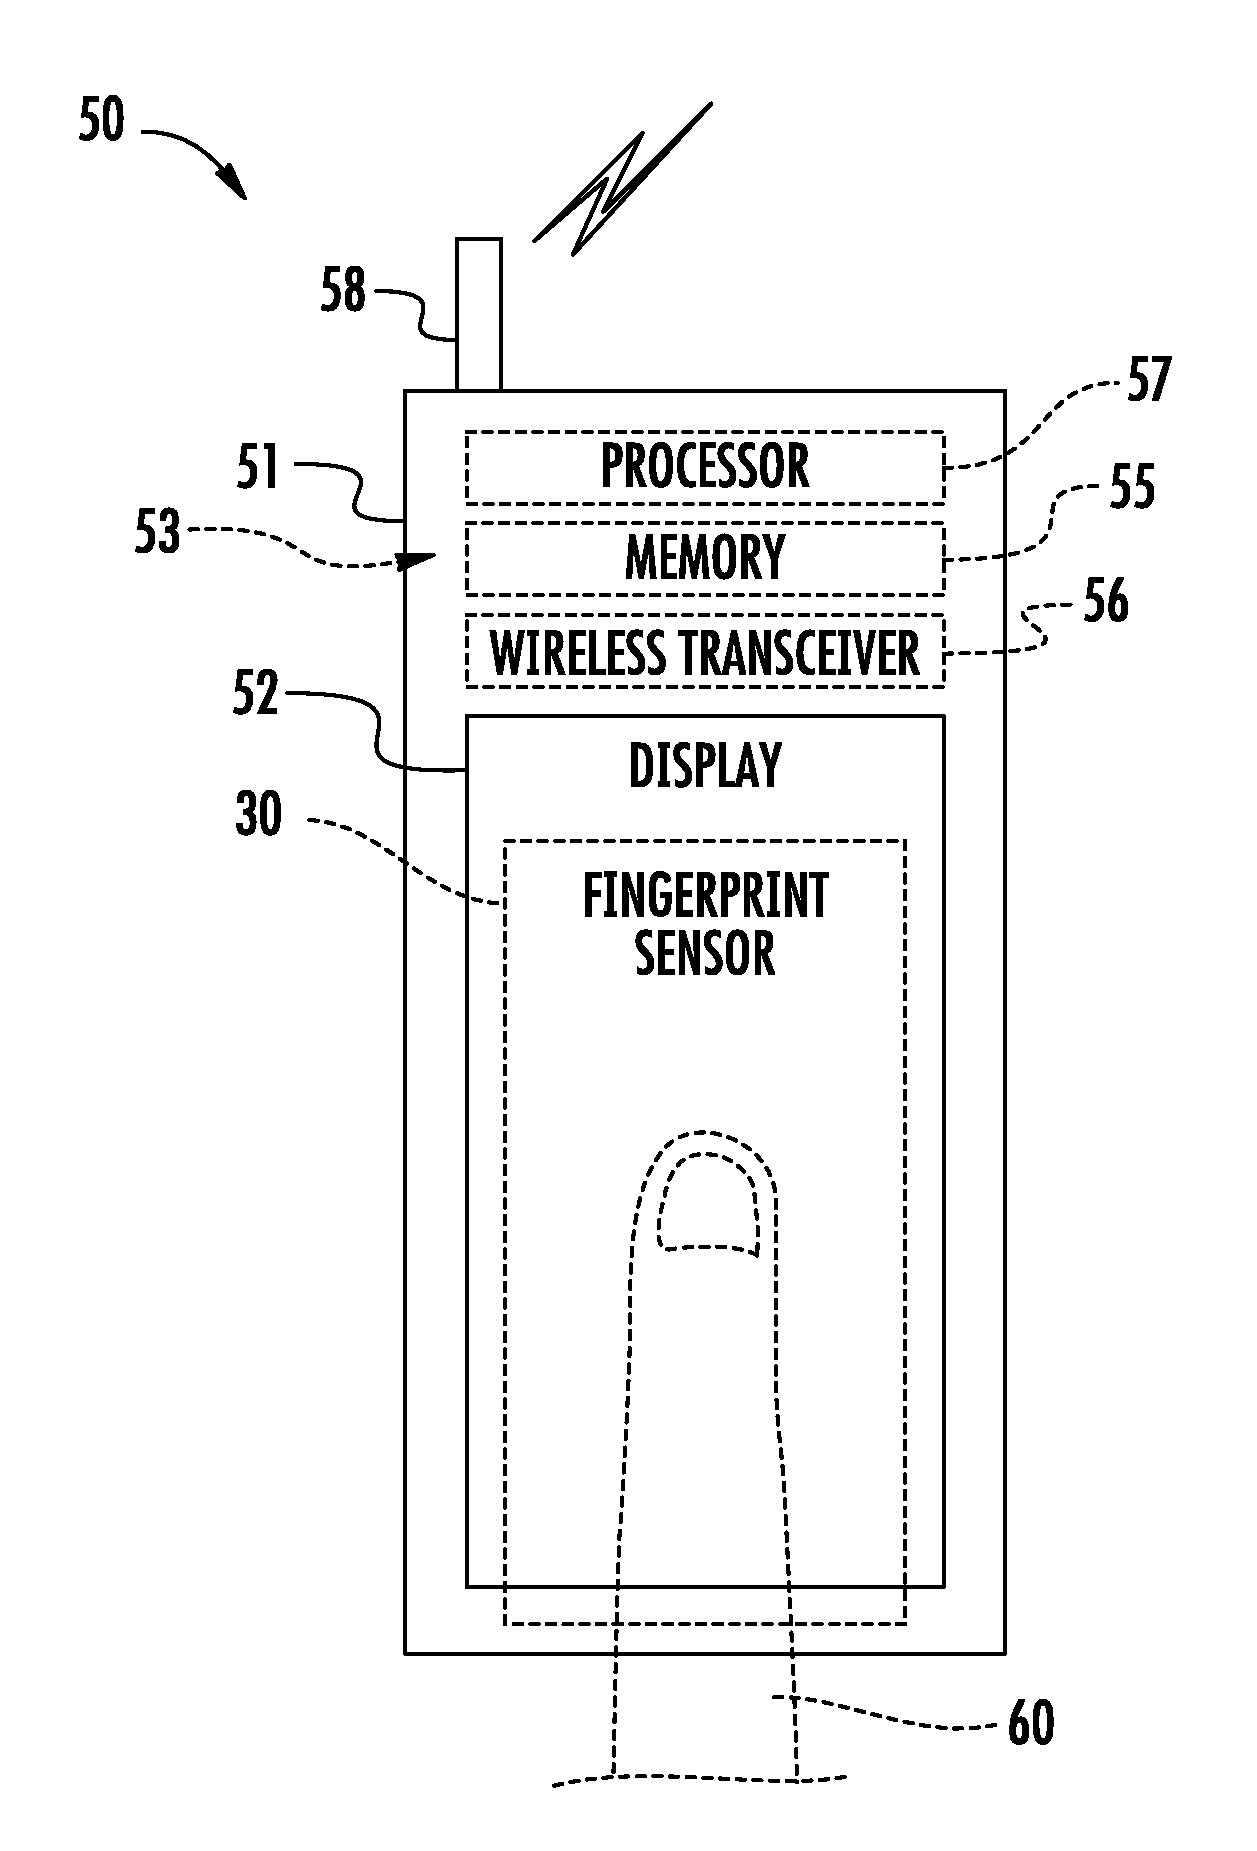 Finger sensor having pixel sensing circuitry for coupling electrodes and pixel sensing traces and related methods